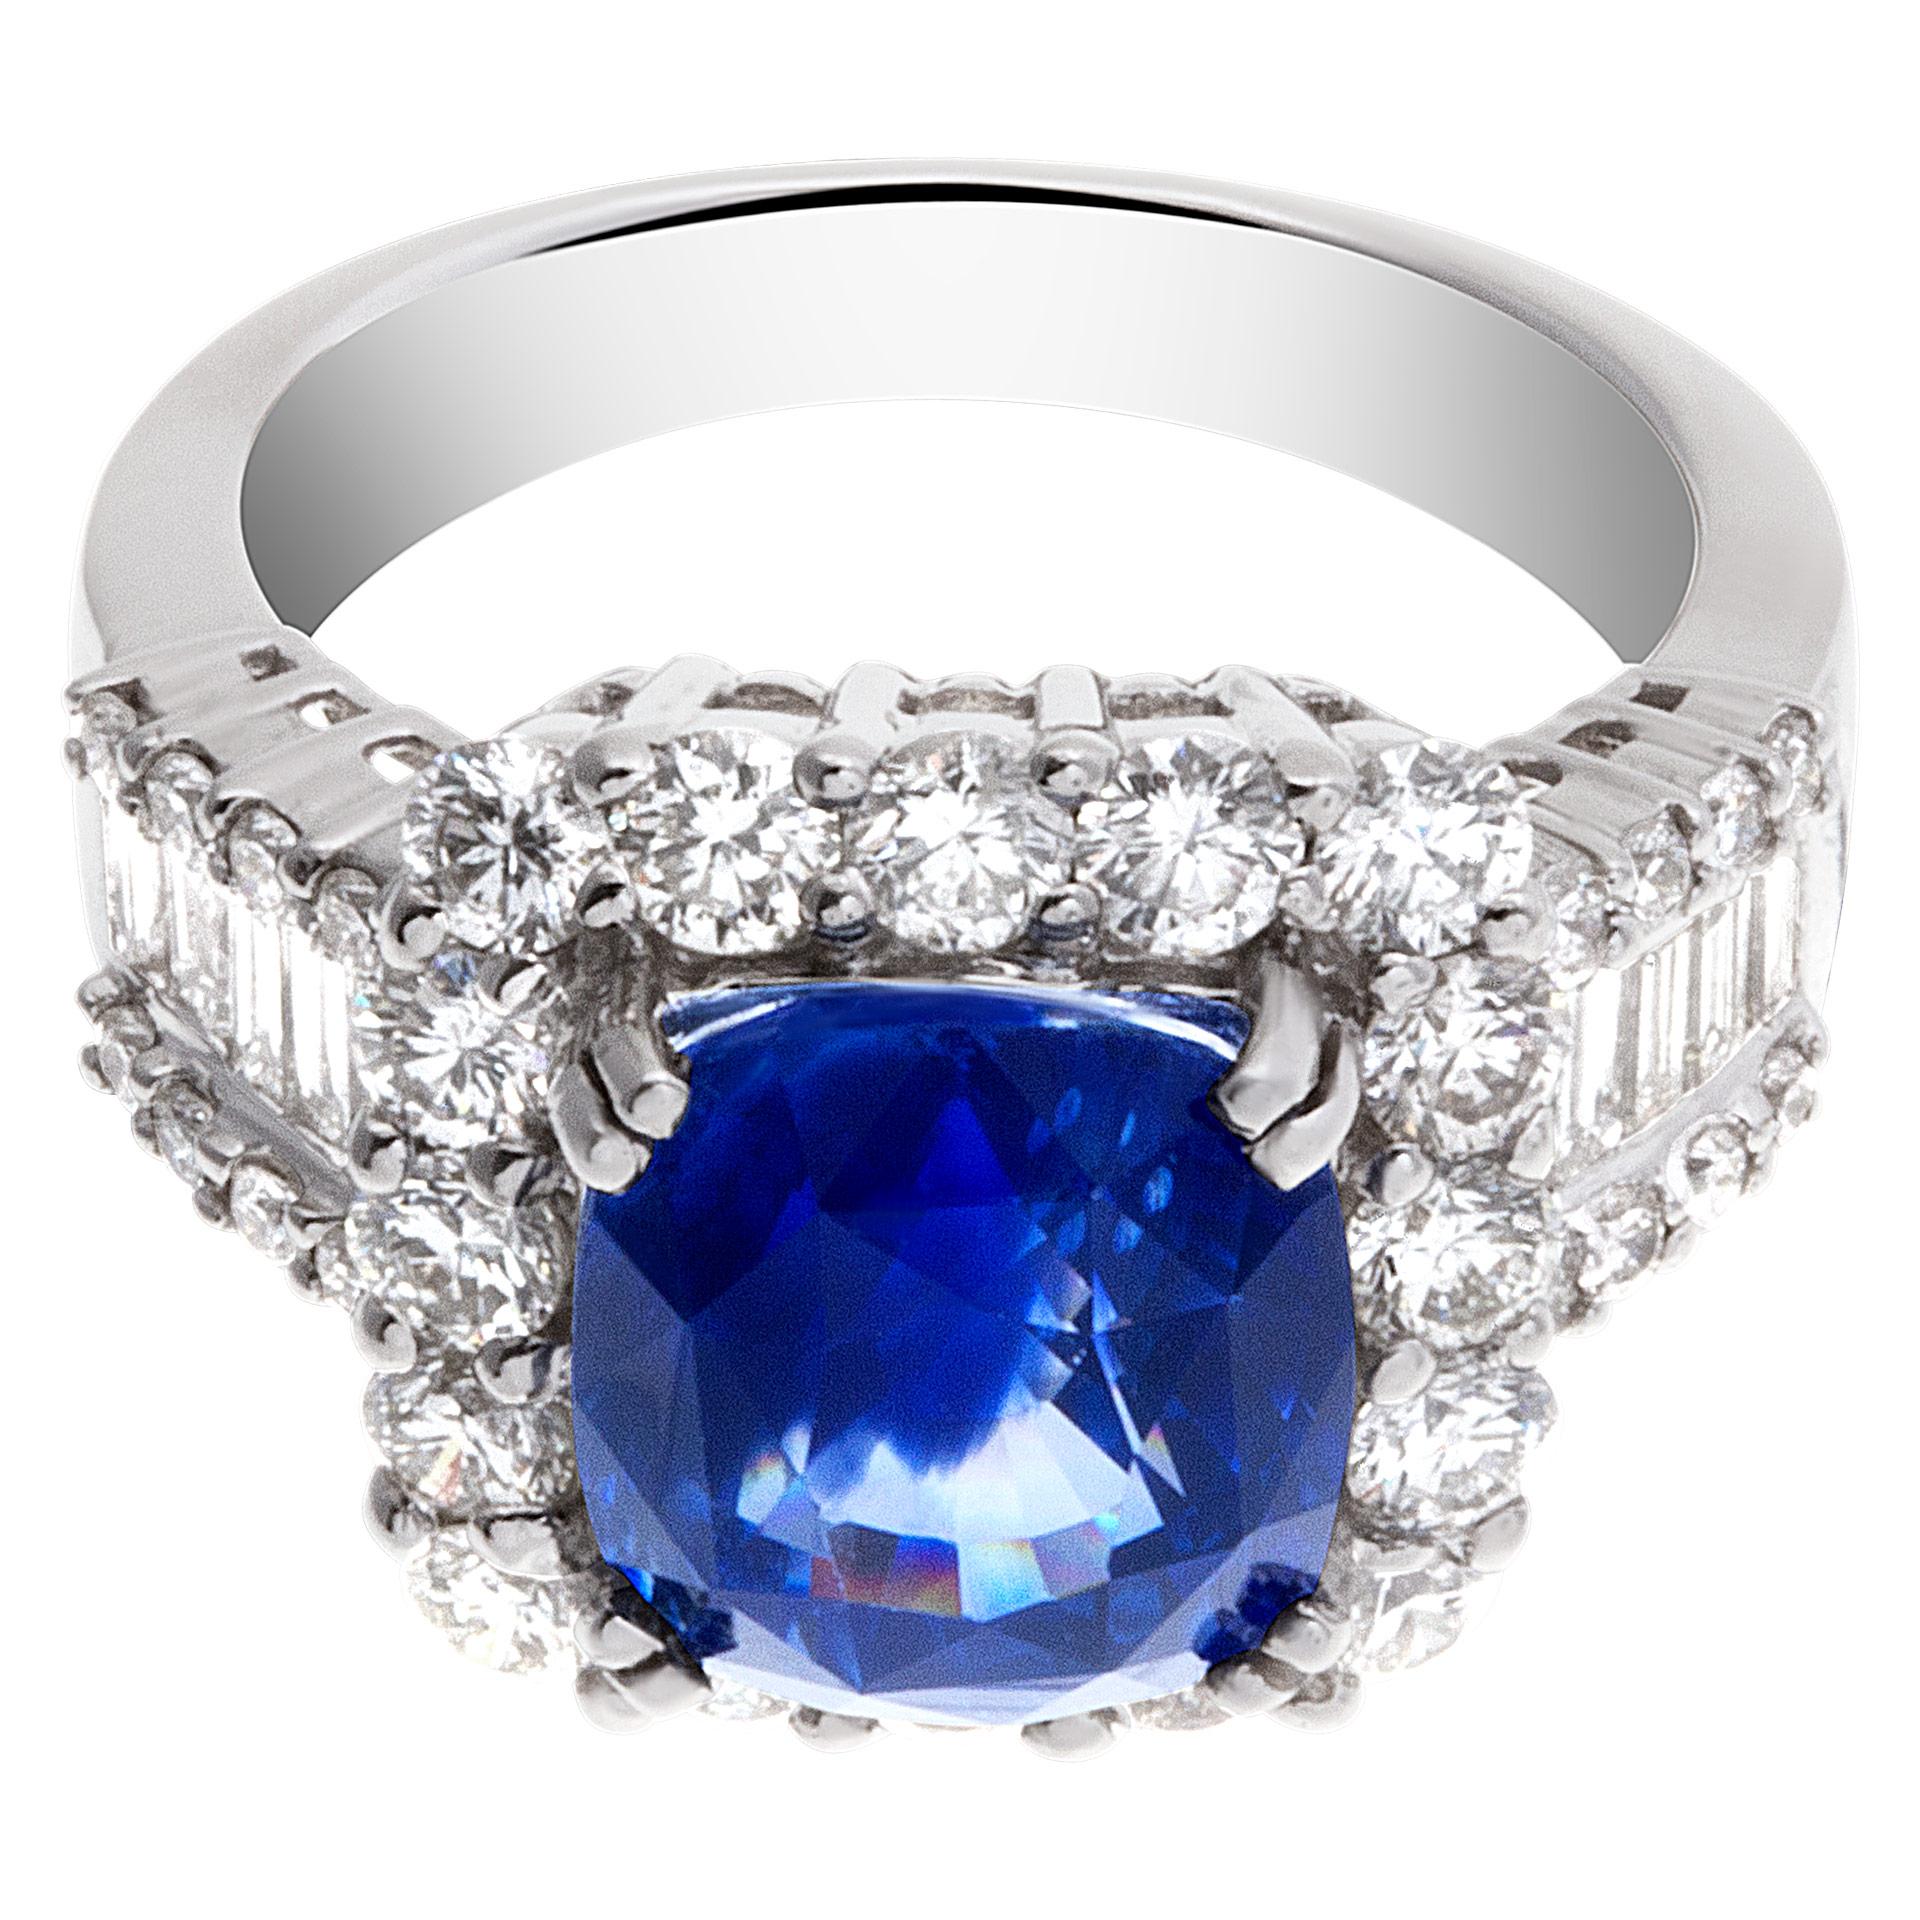 Sparkling 5.73 carat blue sapphire ring with diamond accents in 18k white gold In Excellent Condition For Sale In Surfside, FL